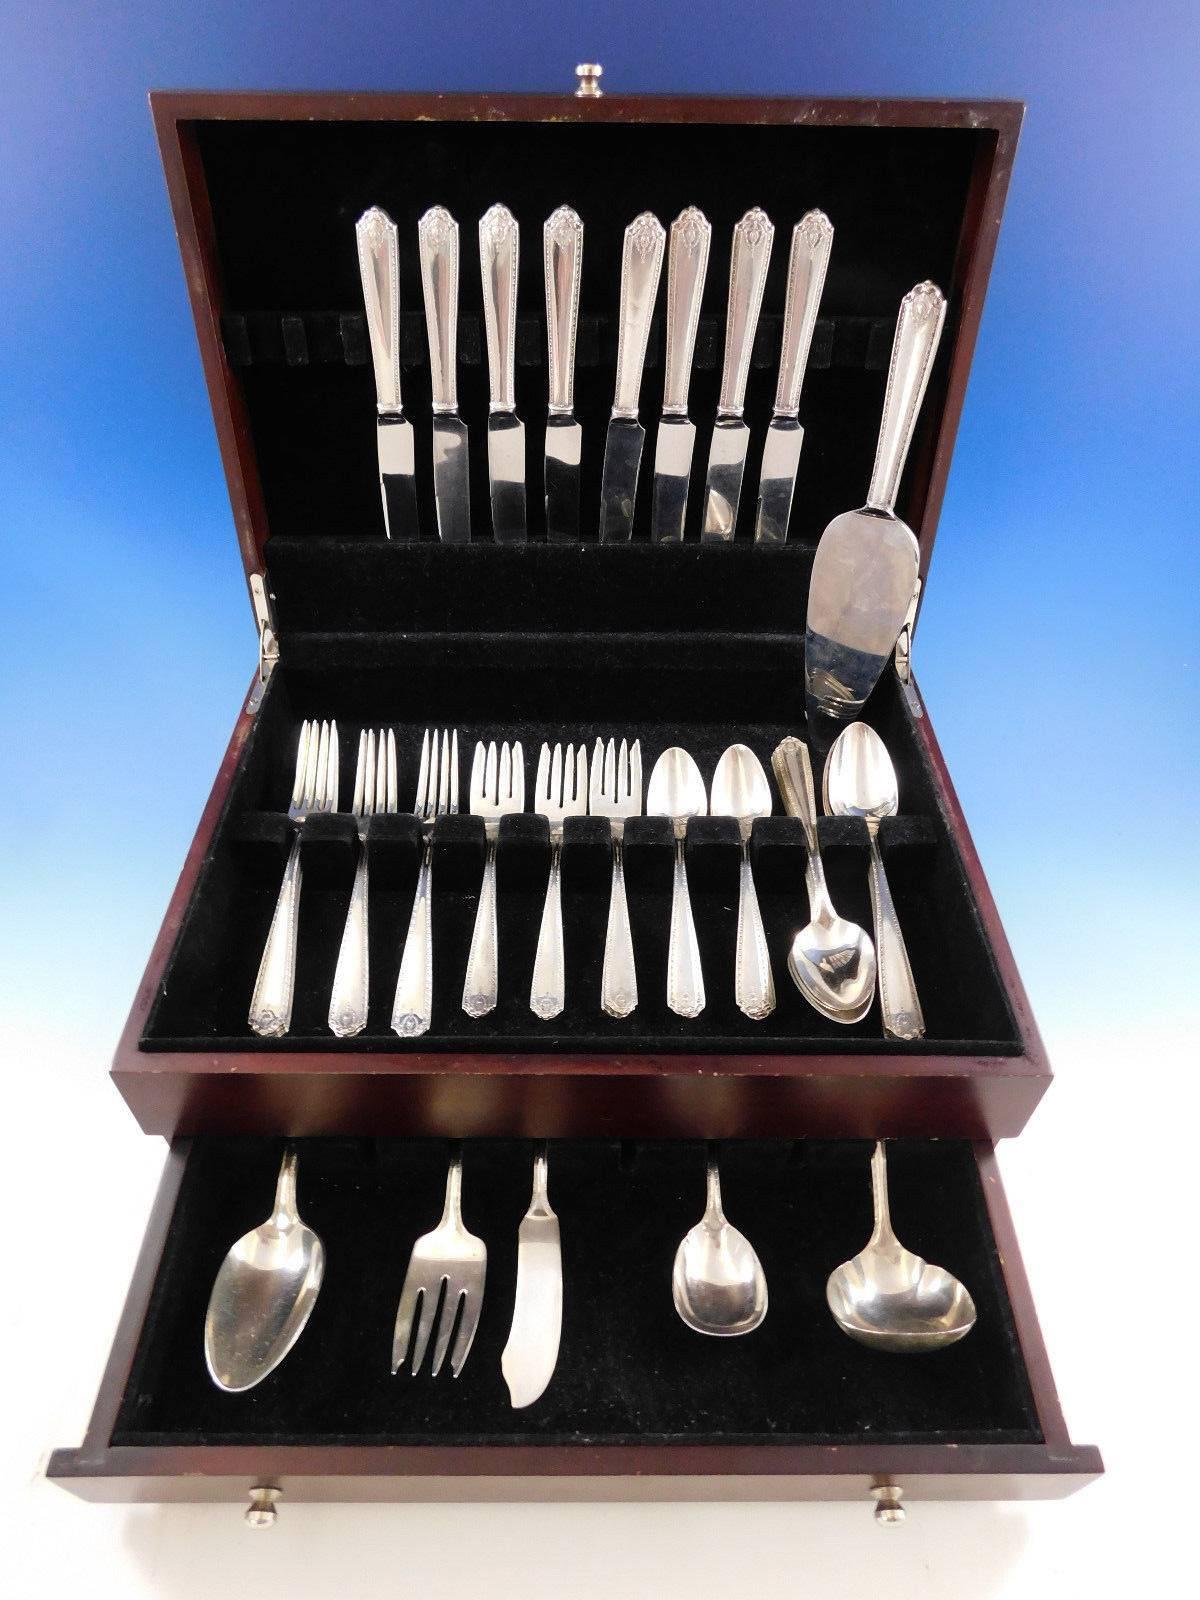 Lady Hilton by Westmorland sterling silver flatware set, 47 pieces. This set includes:

Eight knives, eight 3/4